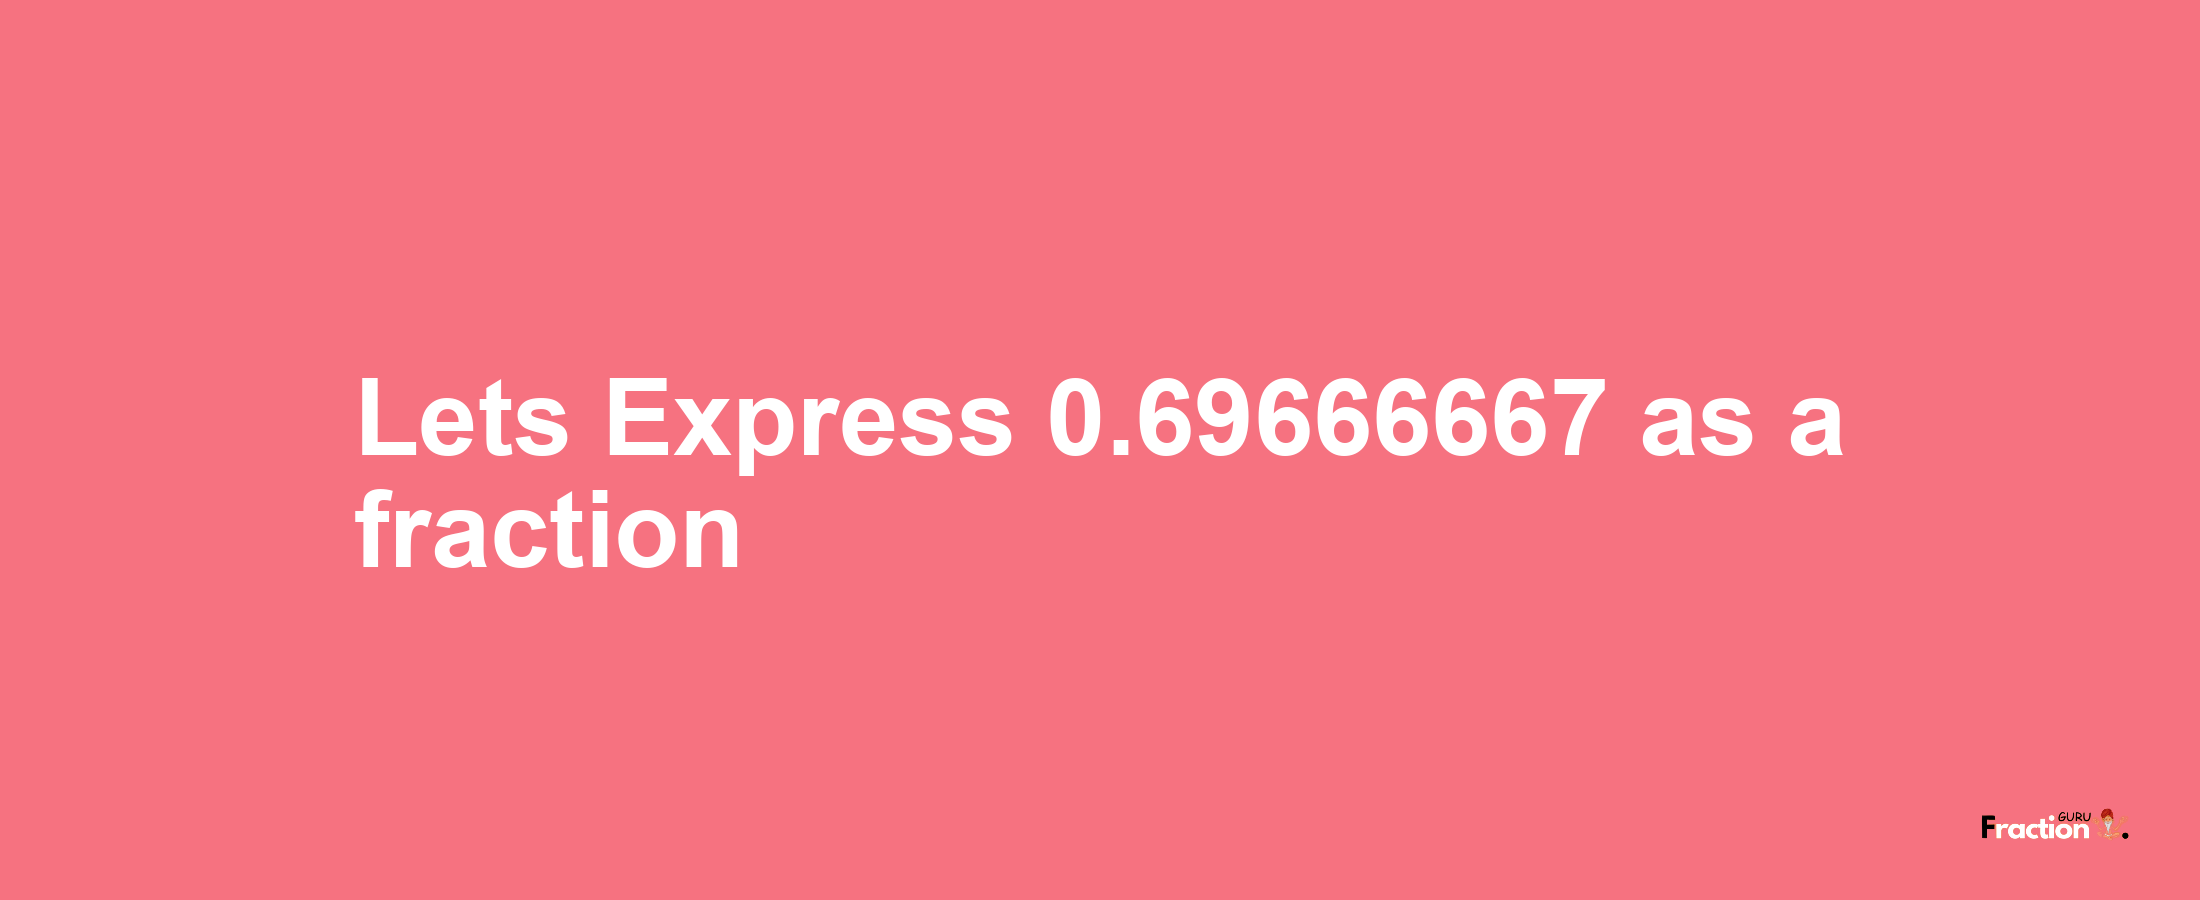 Lets Express 0.69666667 as afraction